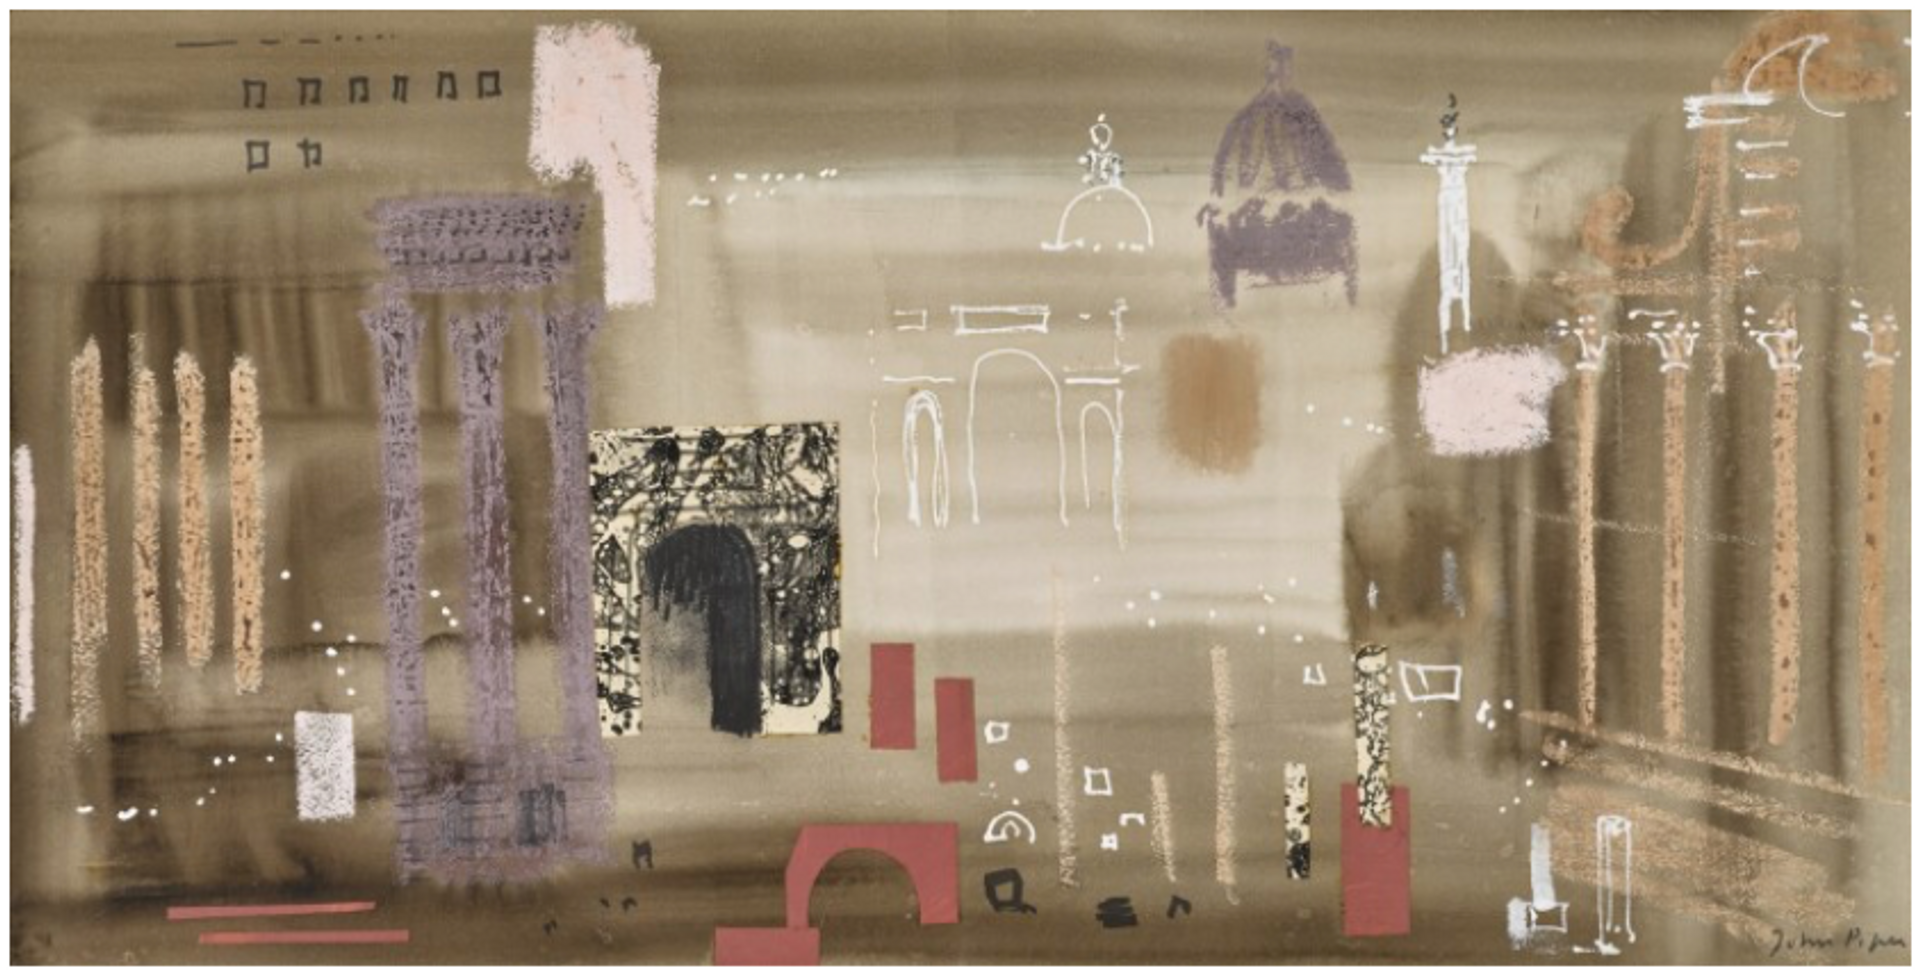 Large-scale collaged painting depicting the photographic shadow of the central city-center of Rome. Abstracted markings of famous cathedral architecture in yellow, purple, and red add identifiable elements to the composition.